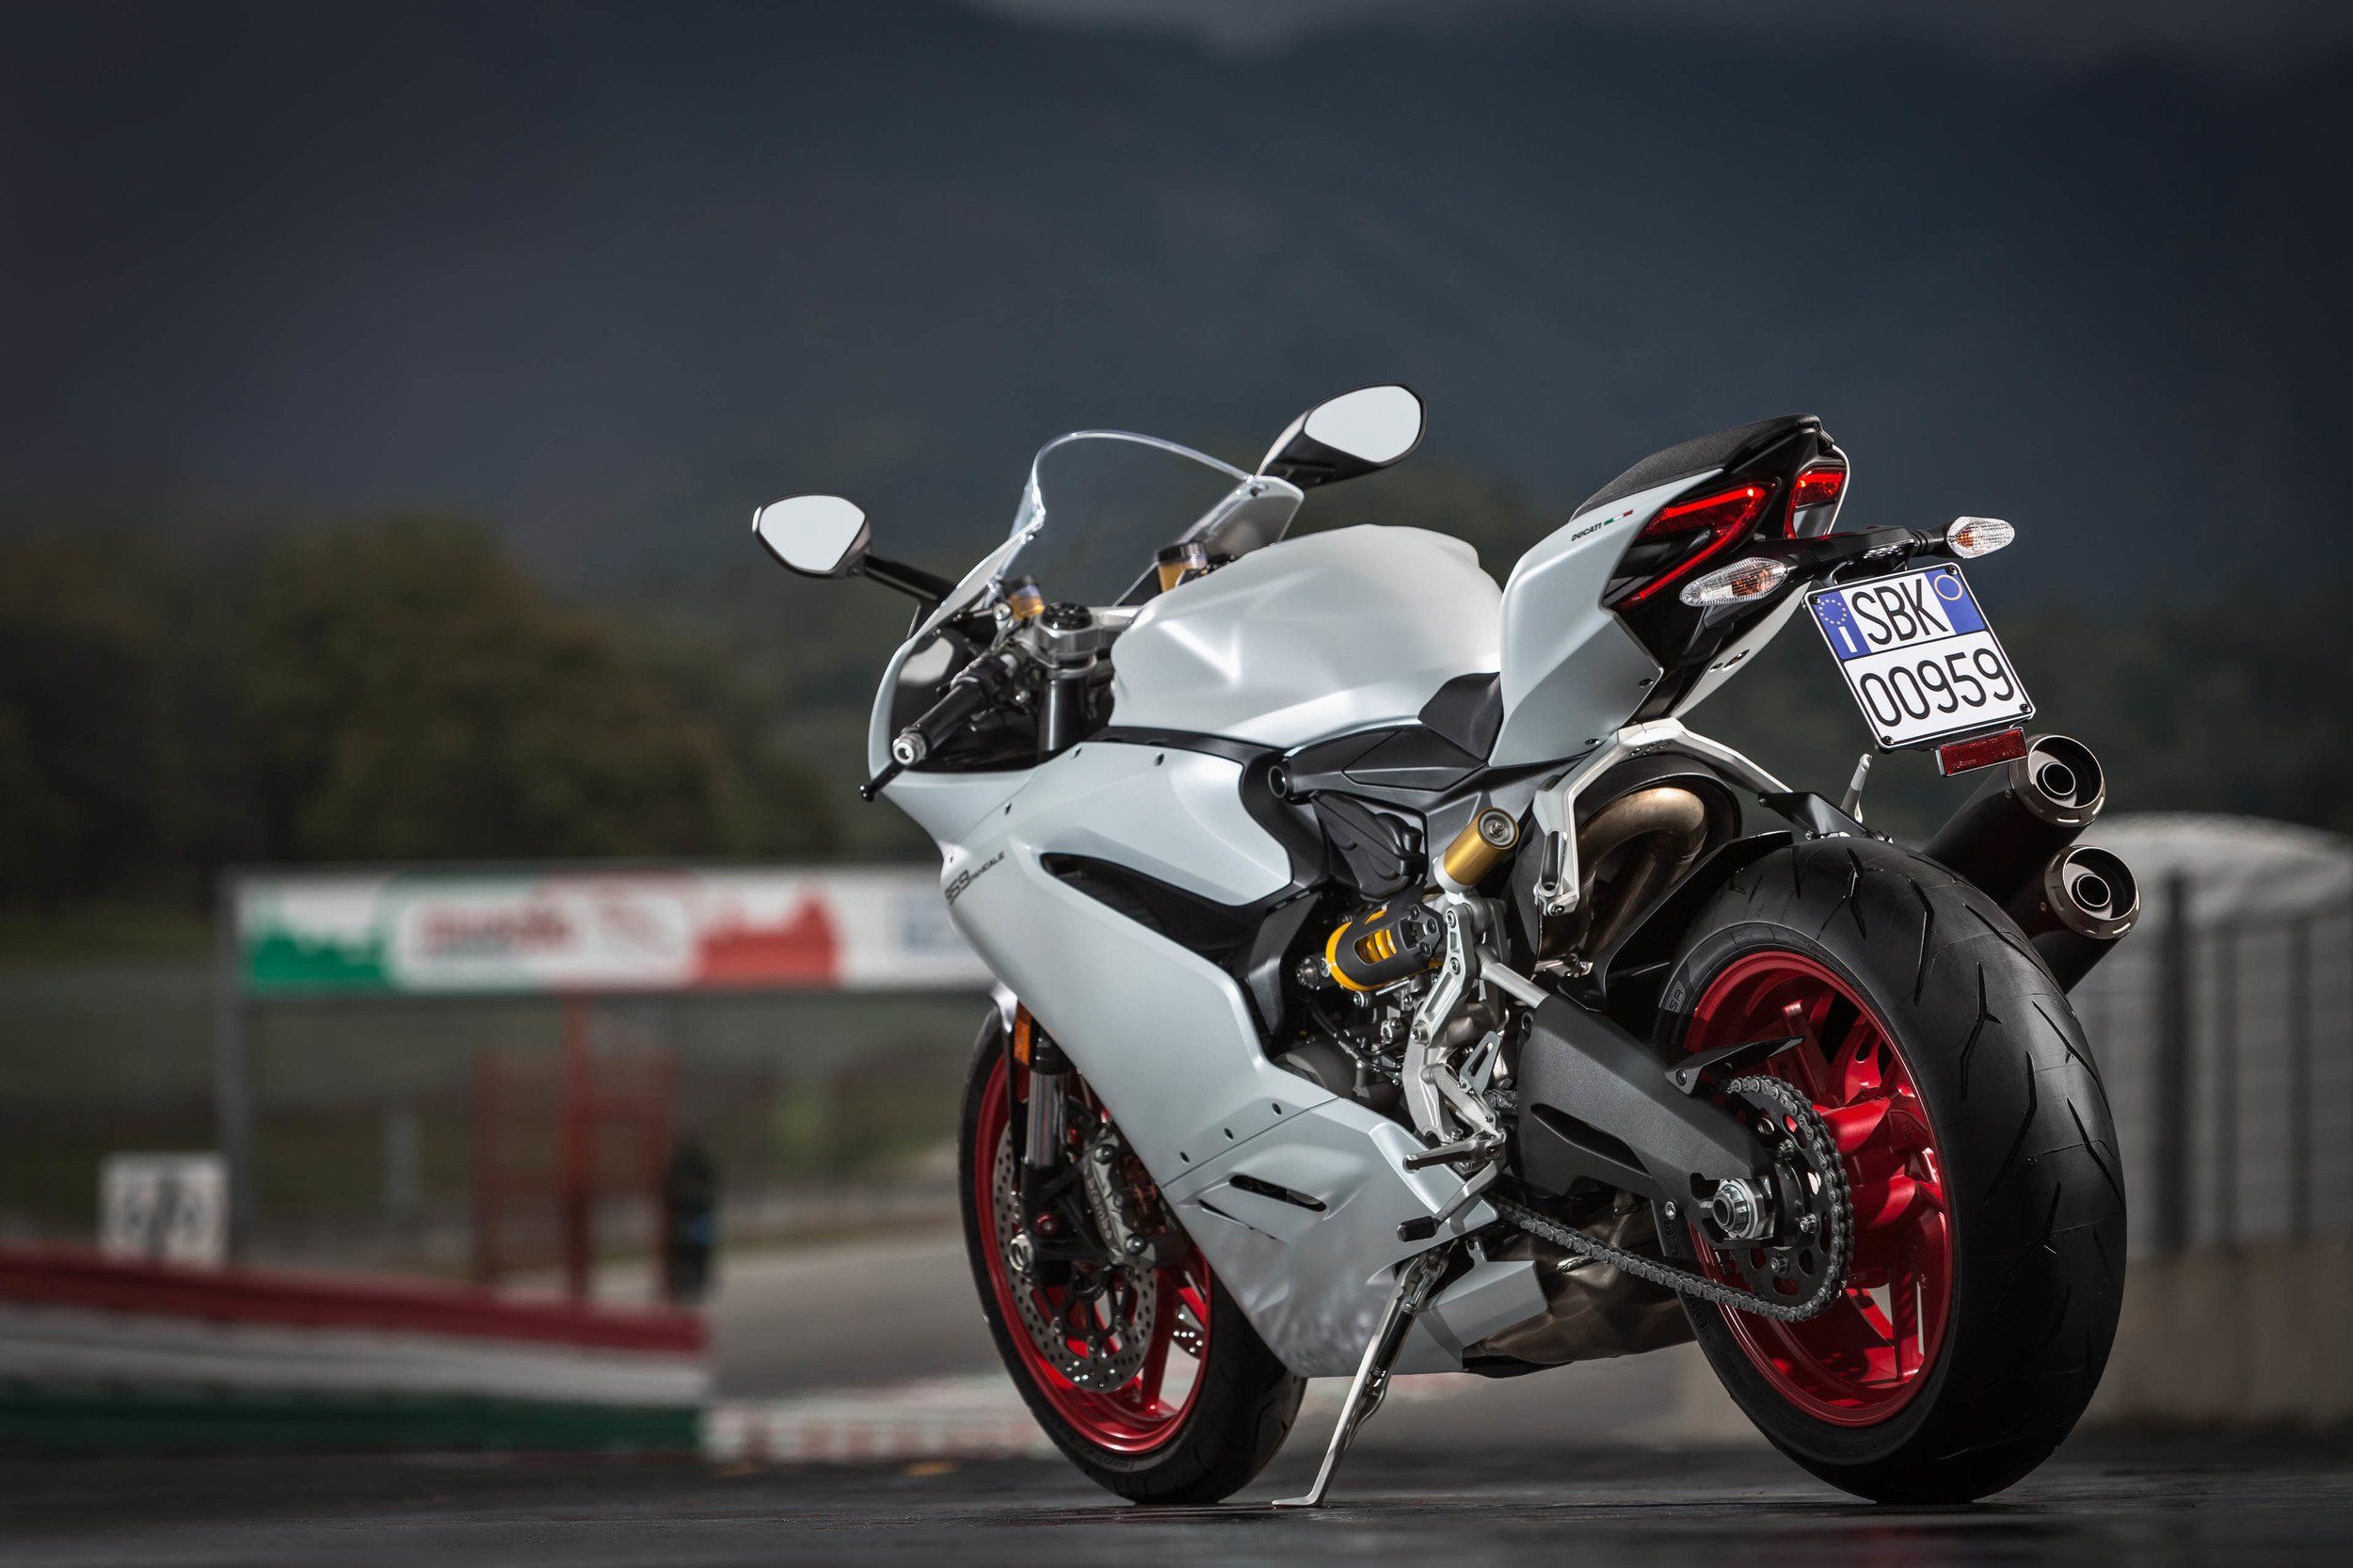 Ducati Panigale 959 2016 motocycles wallpaper | 2500x1666 | 838470 ...